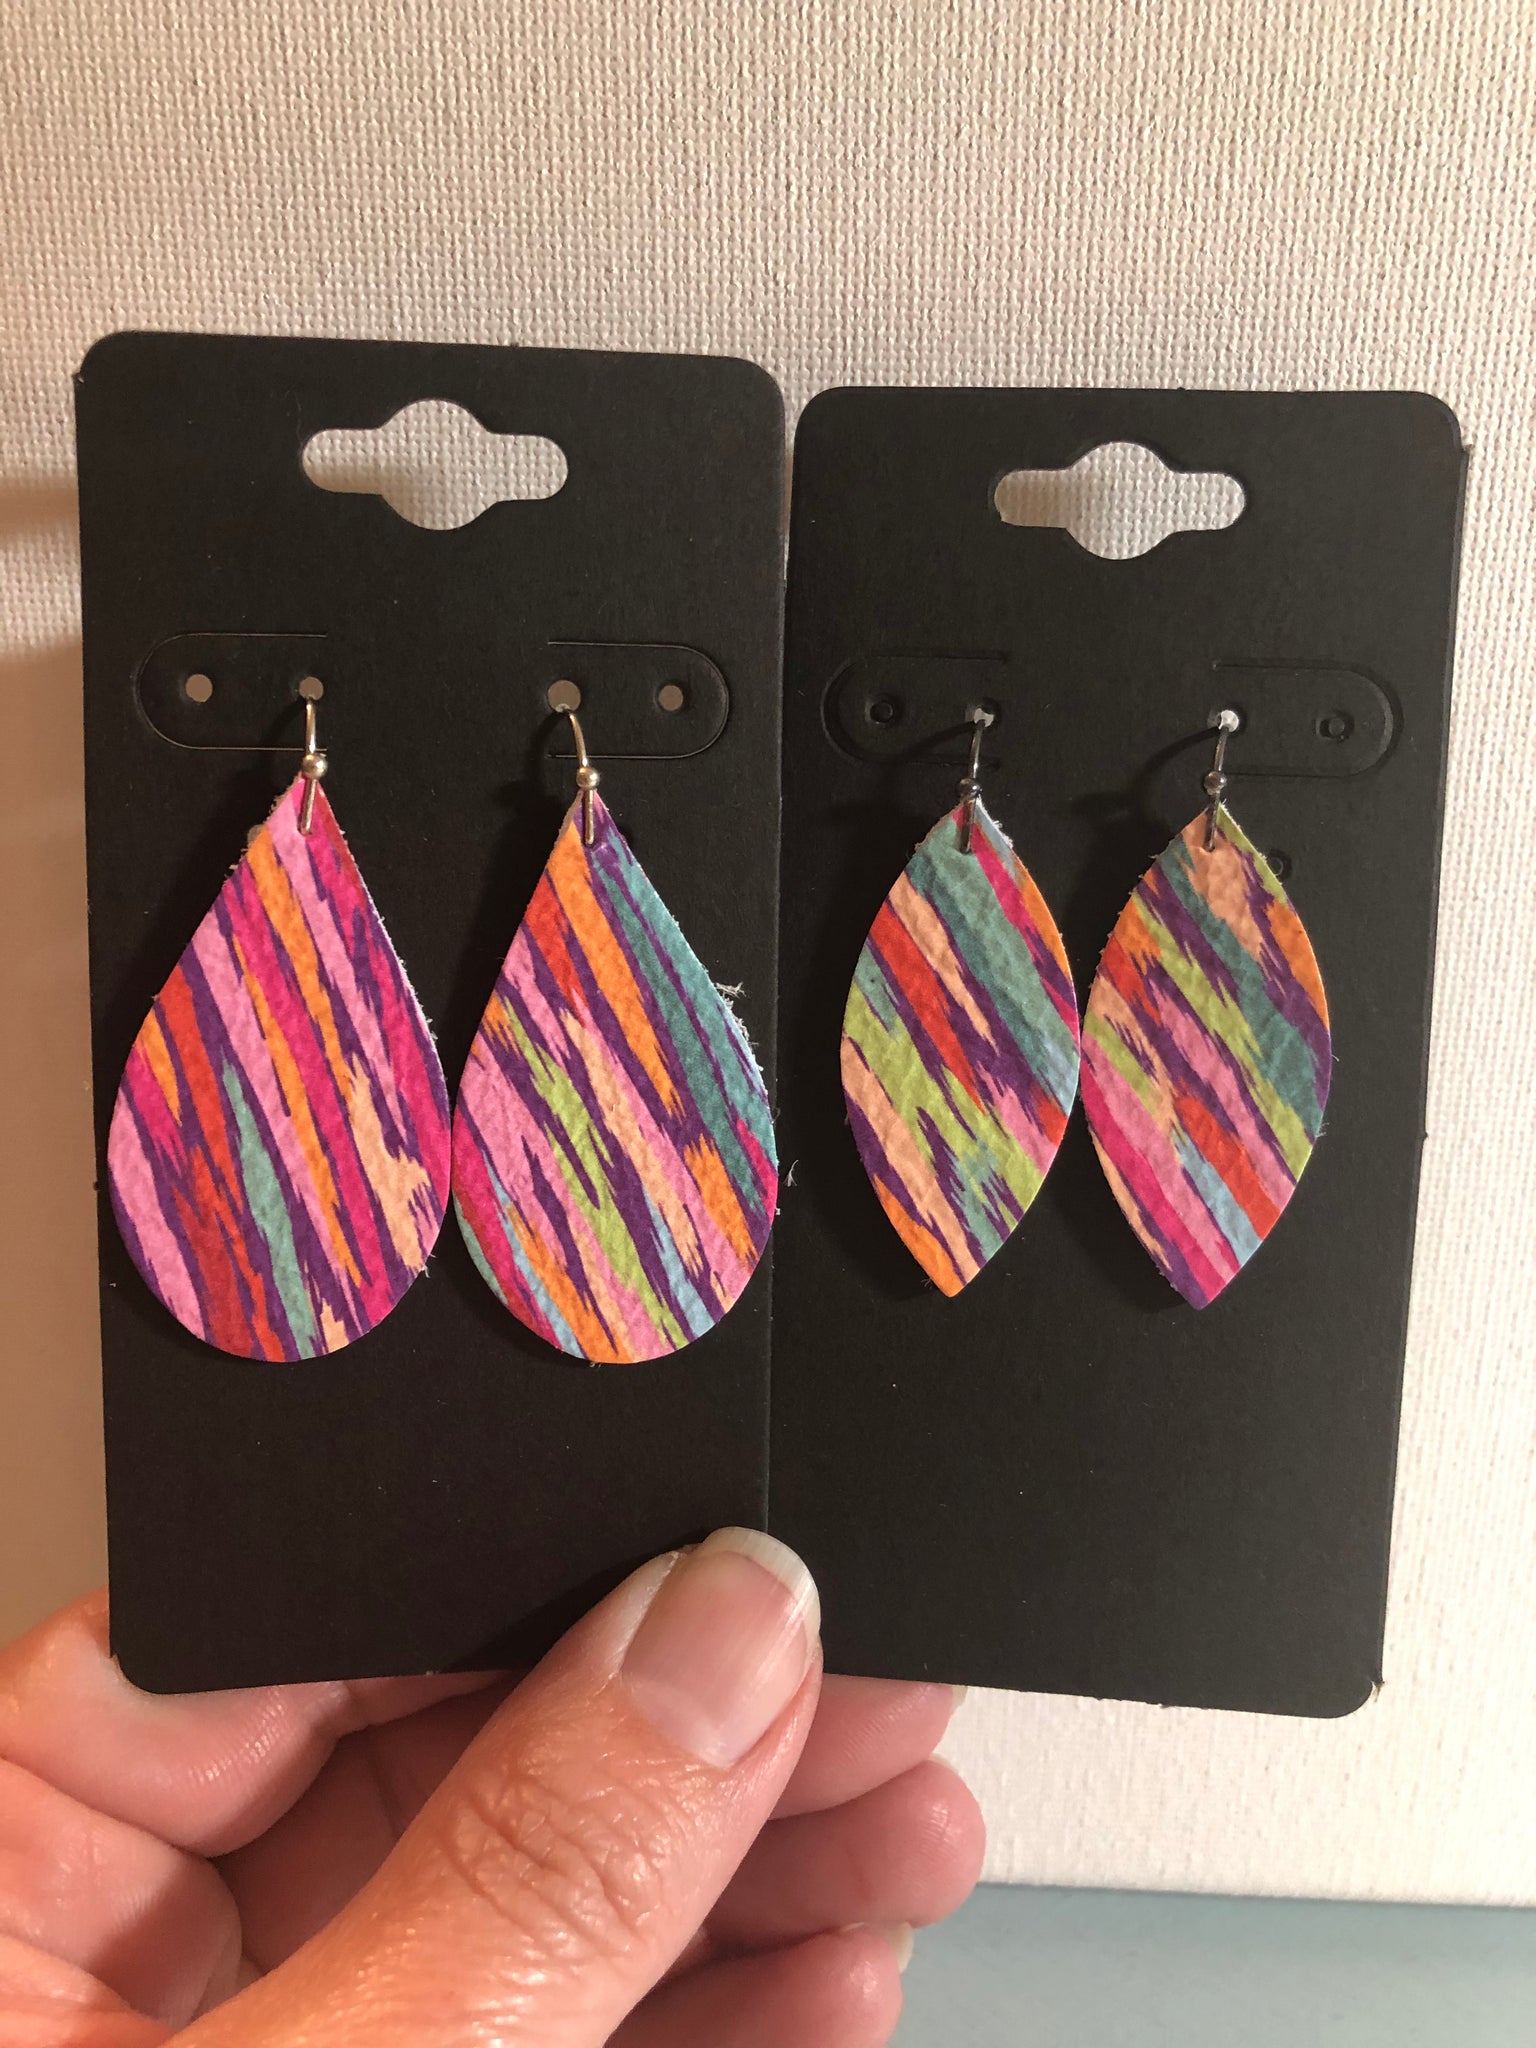 Bright Multi-colored Variegated Stripes Leather Earrings